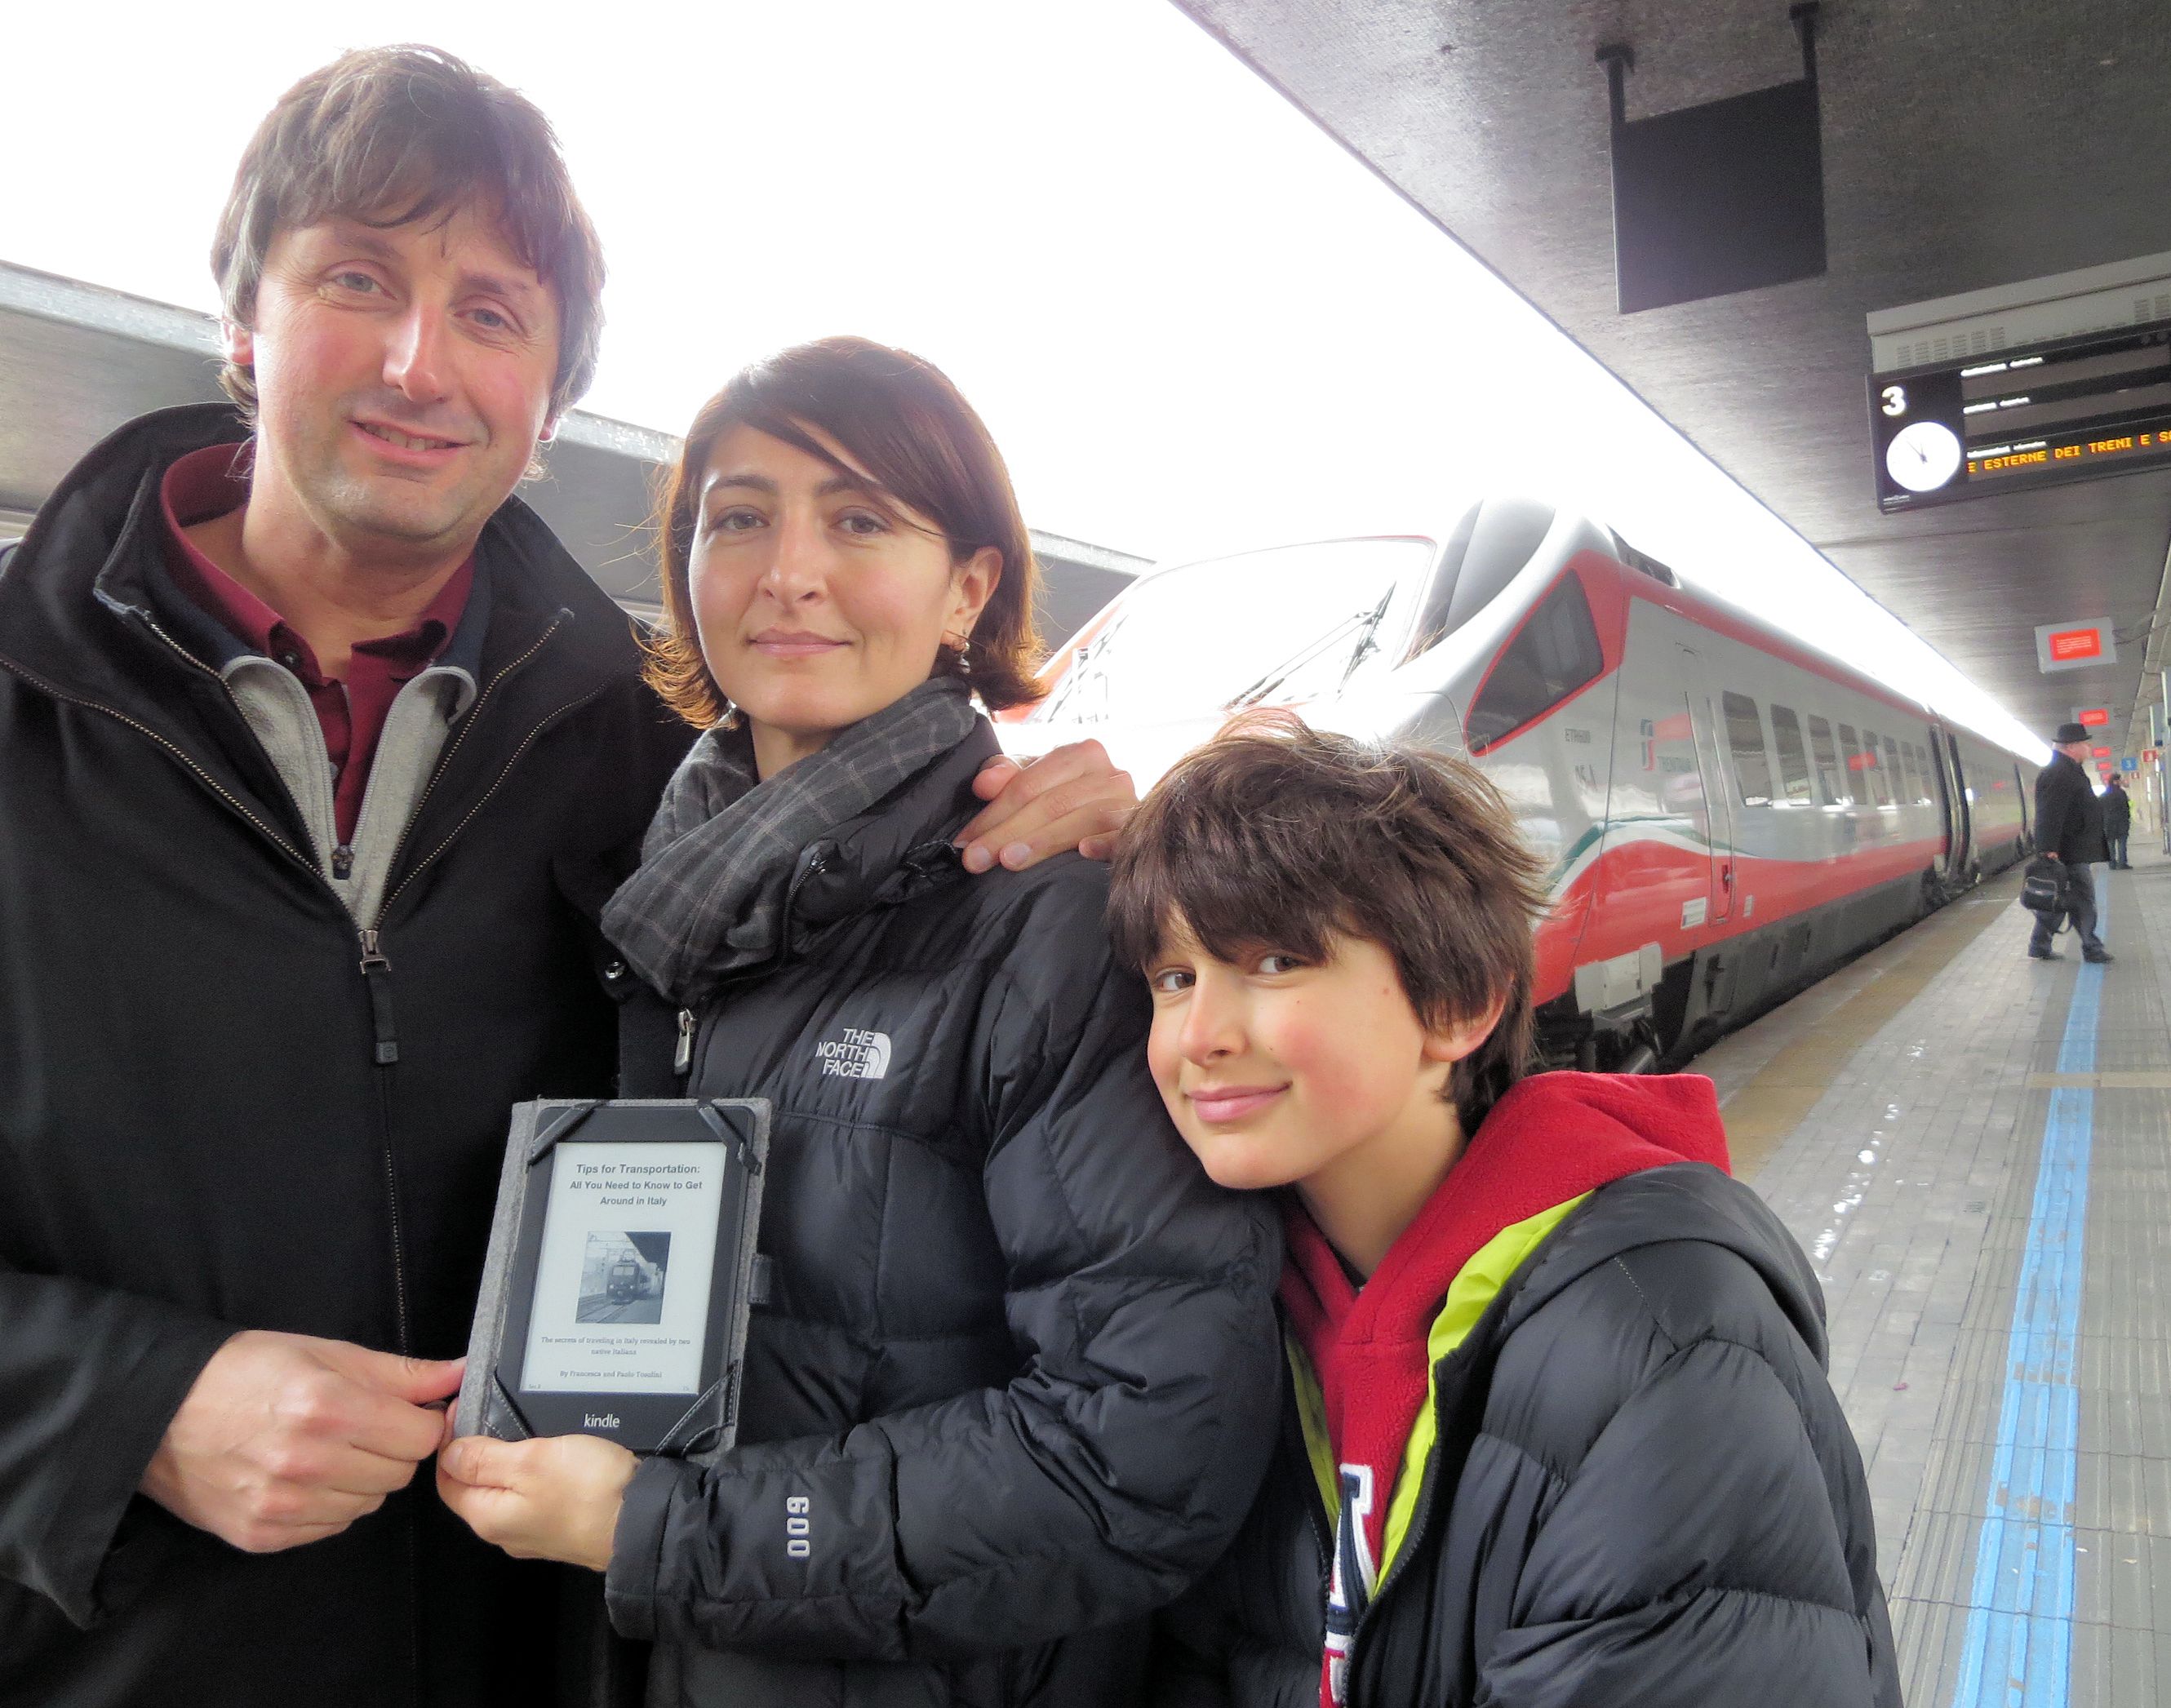 Announcing our new Kindle eBook – Tips for Transportation: All You Need to Know to Get Around in Italy.